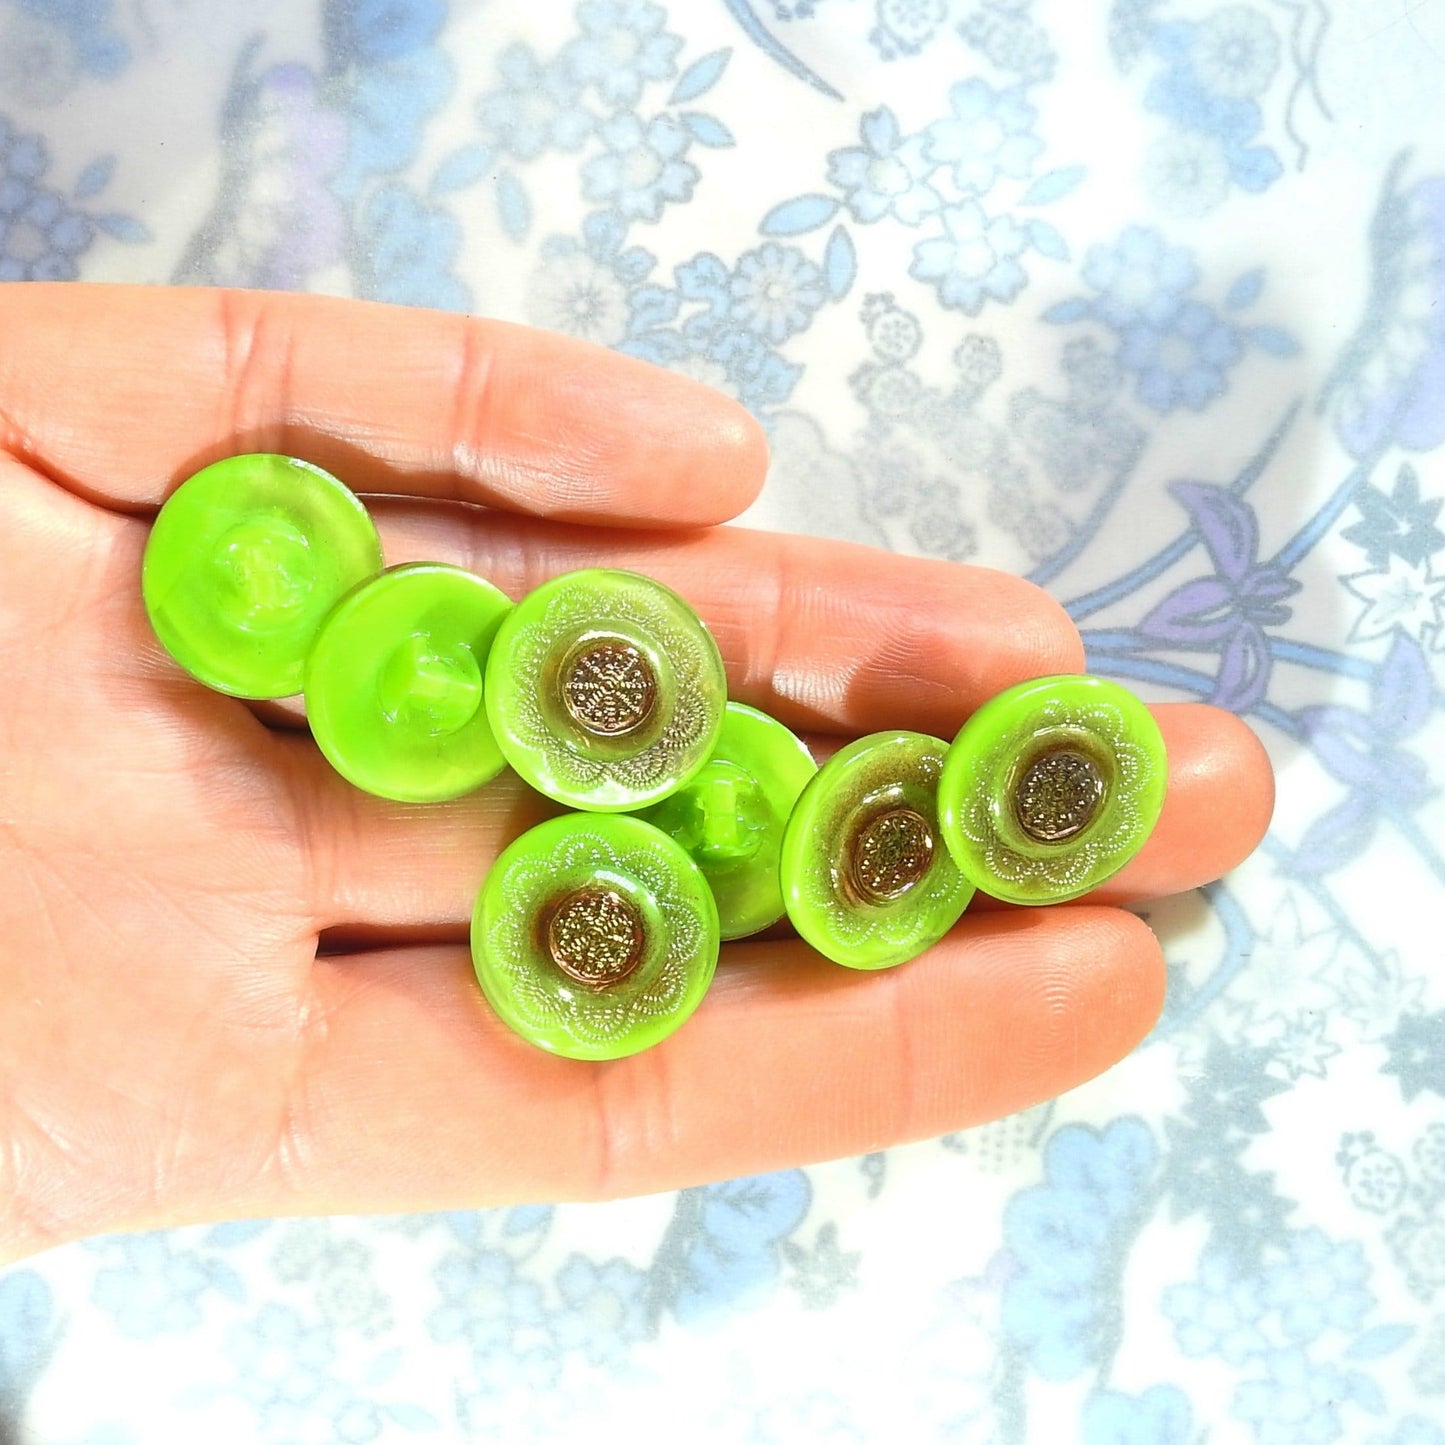 Assorted vintage buttons for shirts and dresses. Made from green Czech glass. For hand-stitching, dressmaking, shirtmaking, and upcycling